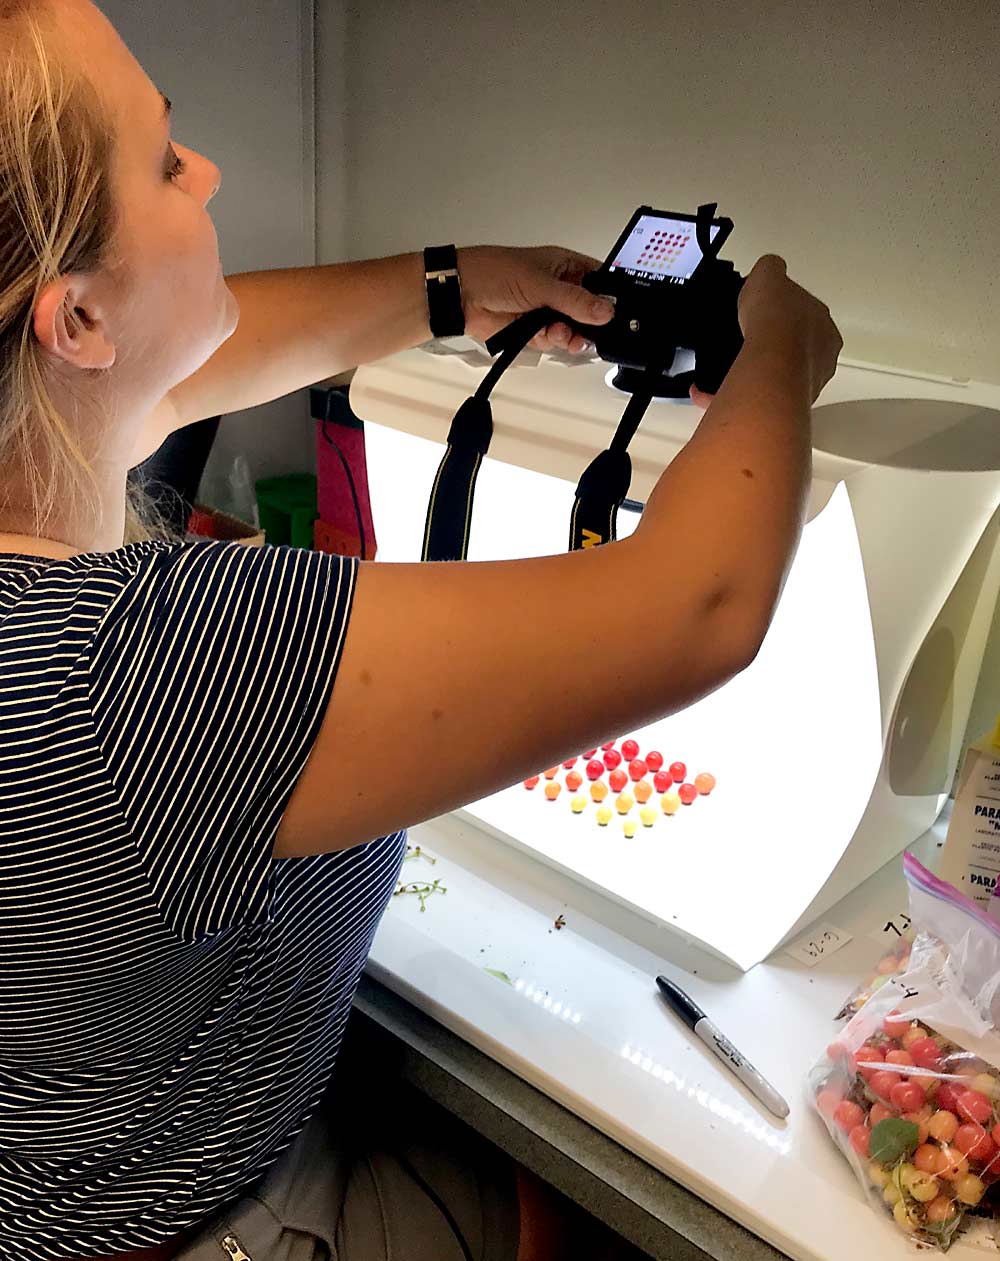 Using a light box, the researchers measured the amount of red pigment in different ripeness levels of cherries. They found that fruit color is a significant factor in initiating spotted wing drosophila oviposition. (Courtesy Nikki Rothwell/Michigan State University)